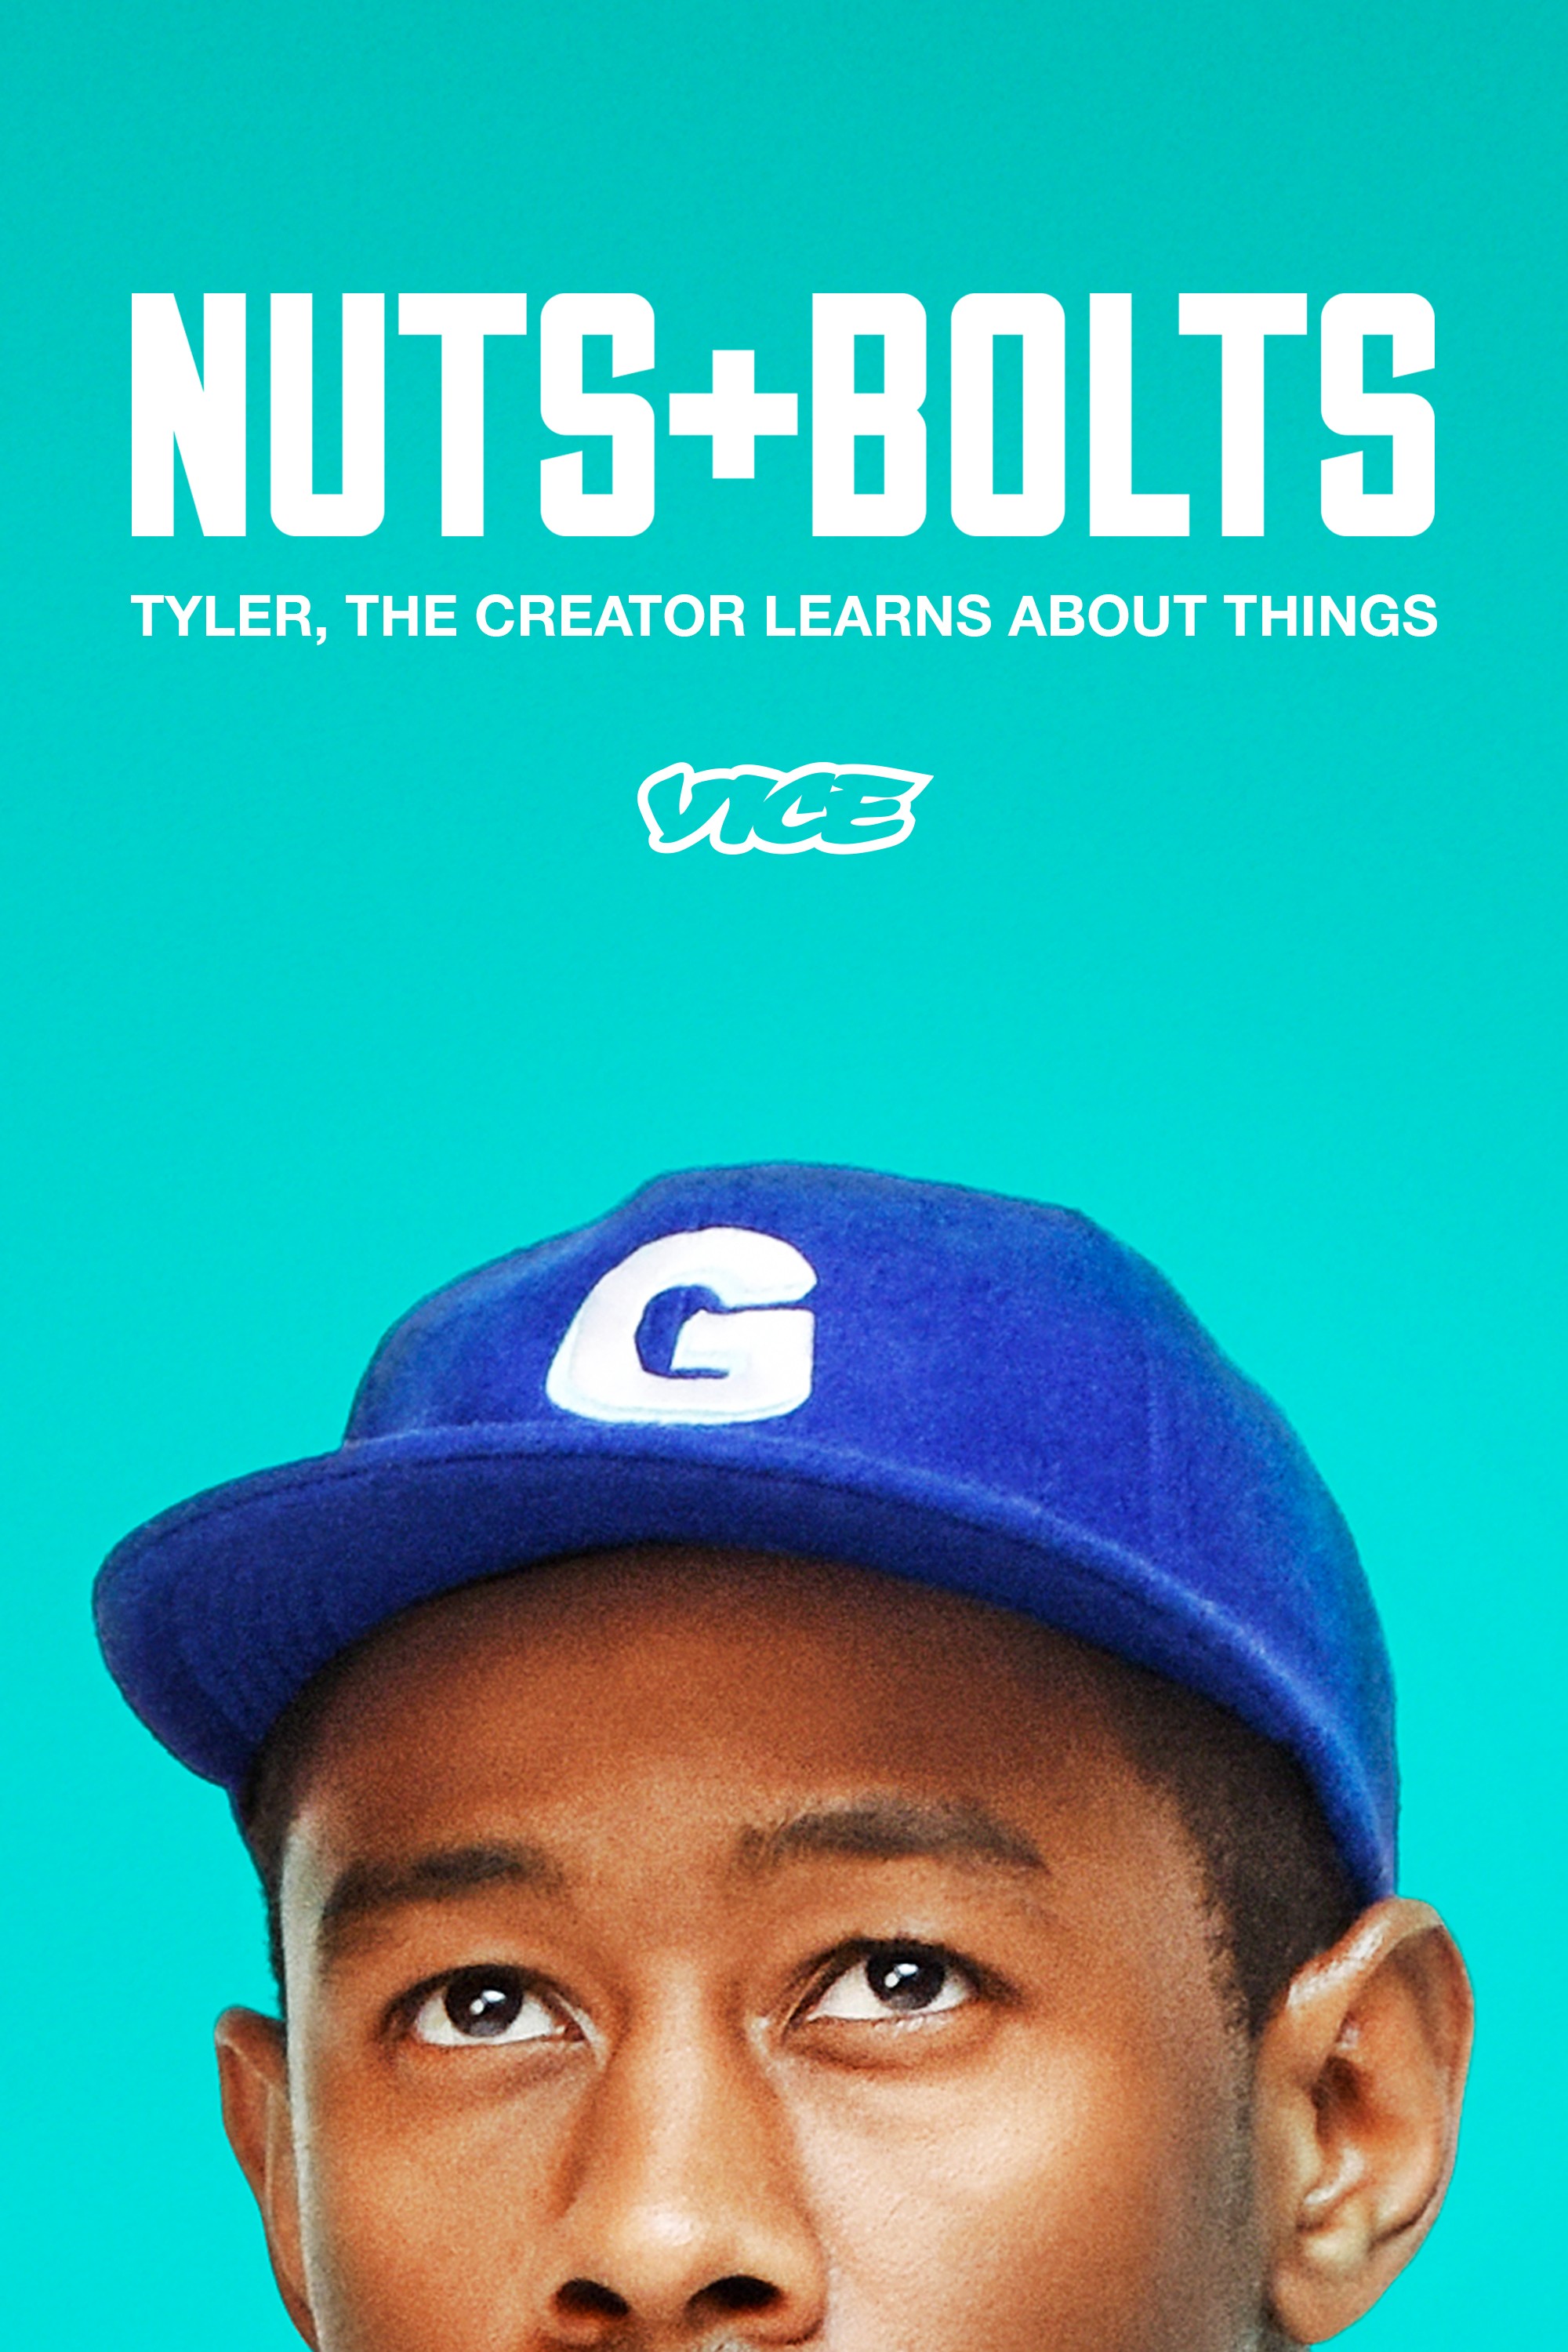 Watch the Trailer for Tyler, The Creator's New TV Show 'Nuts + Bolts